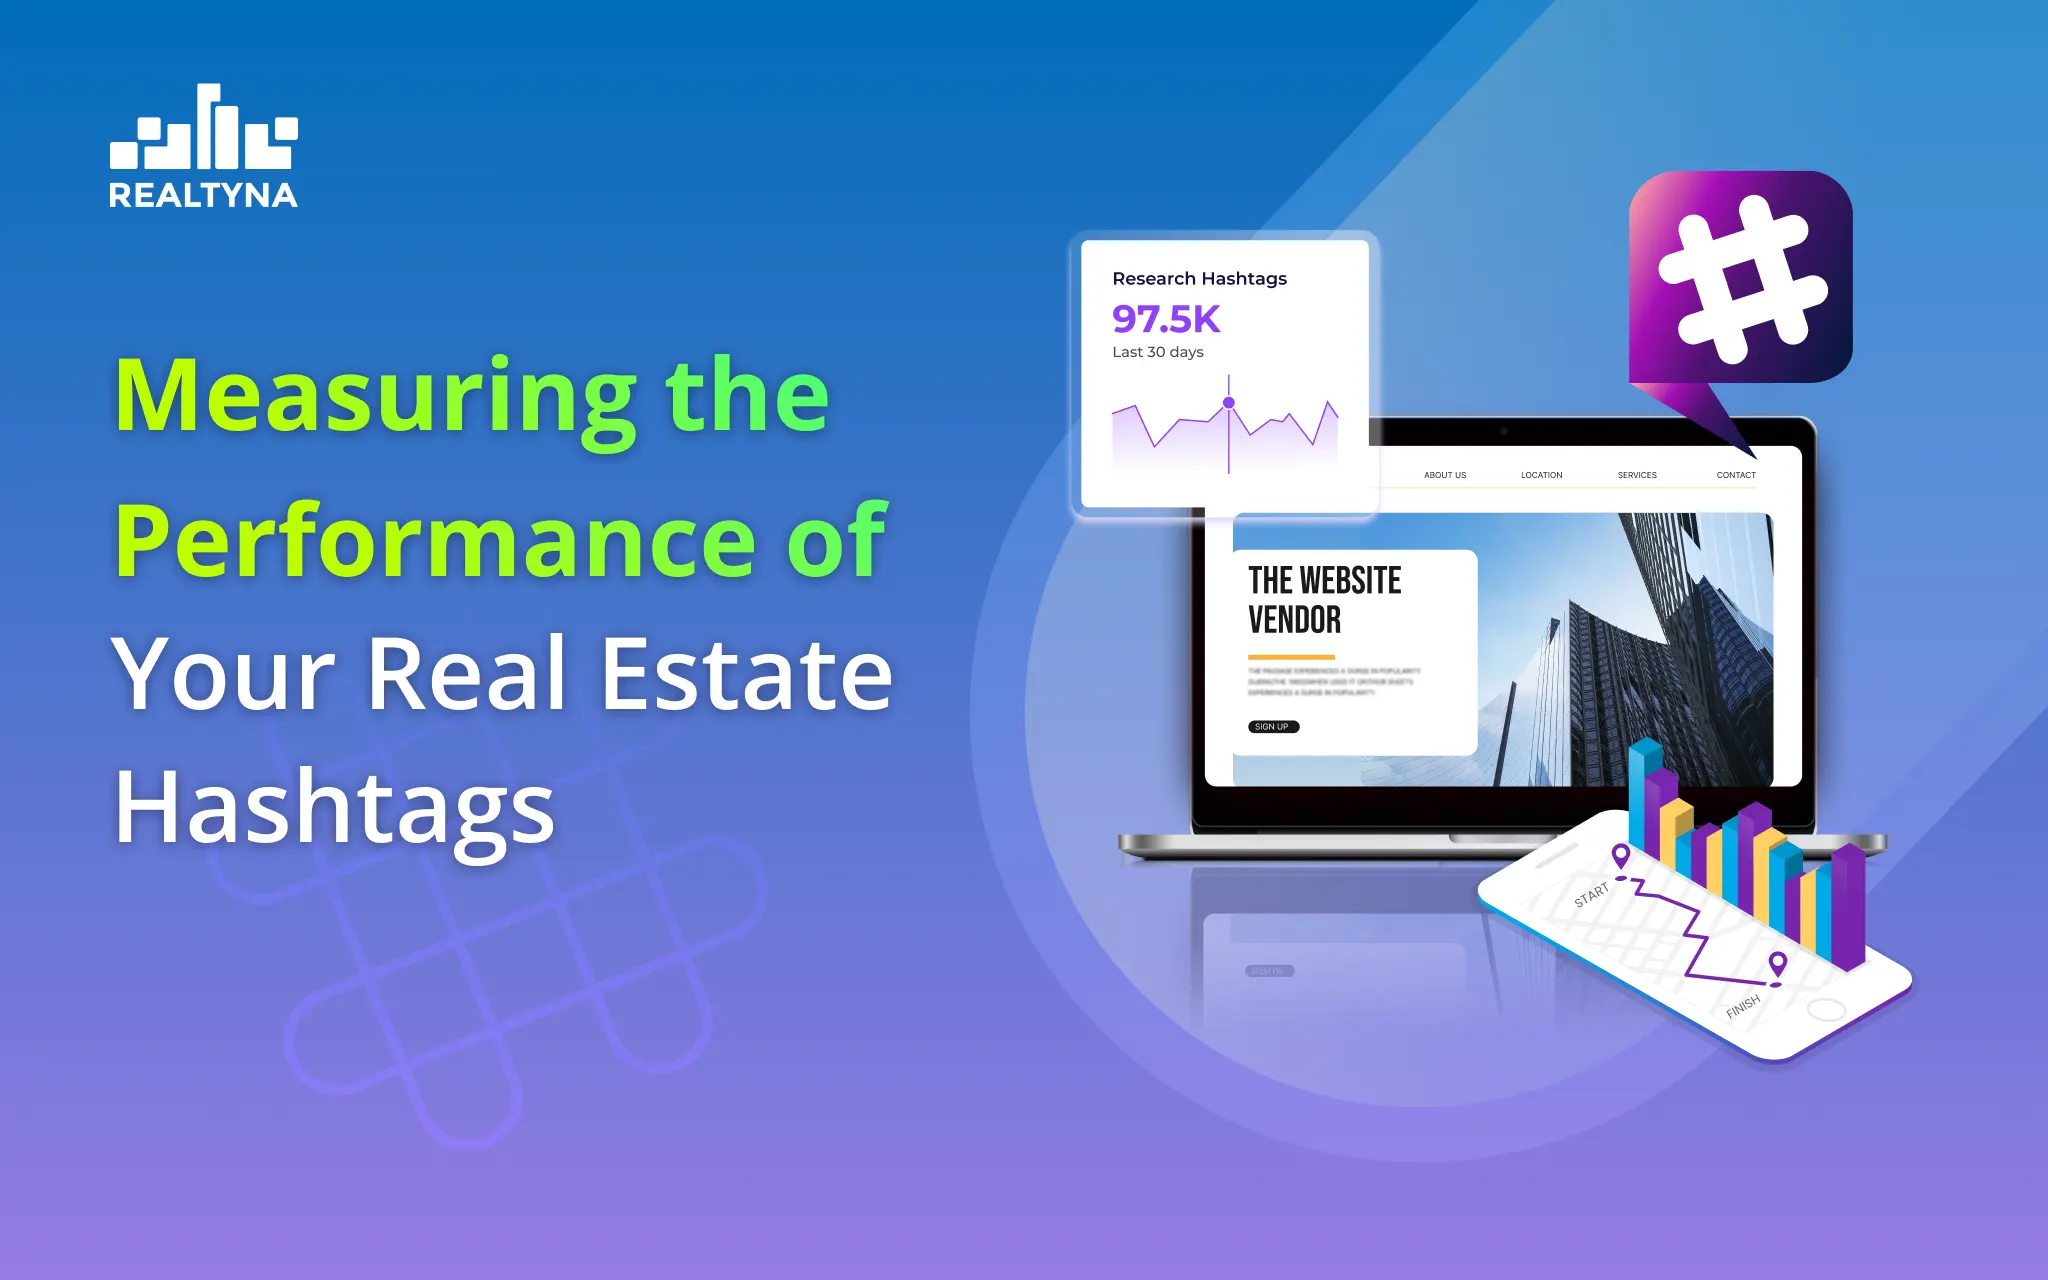 Measuring the Performance of Your Real Estate Hashtags